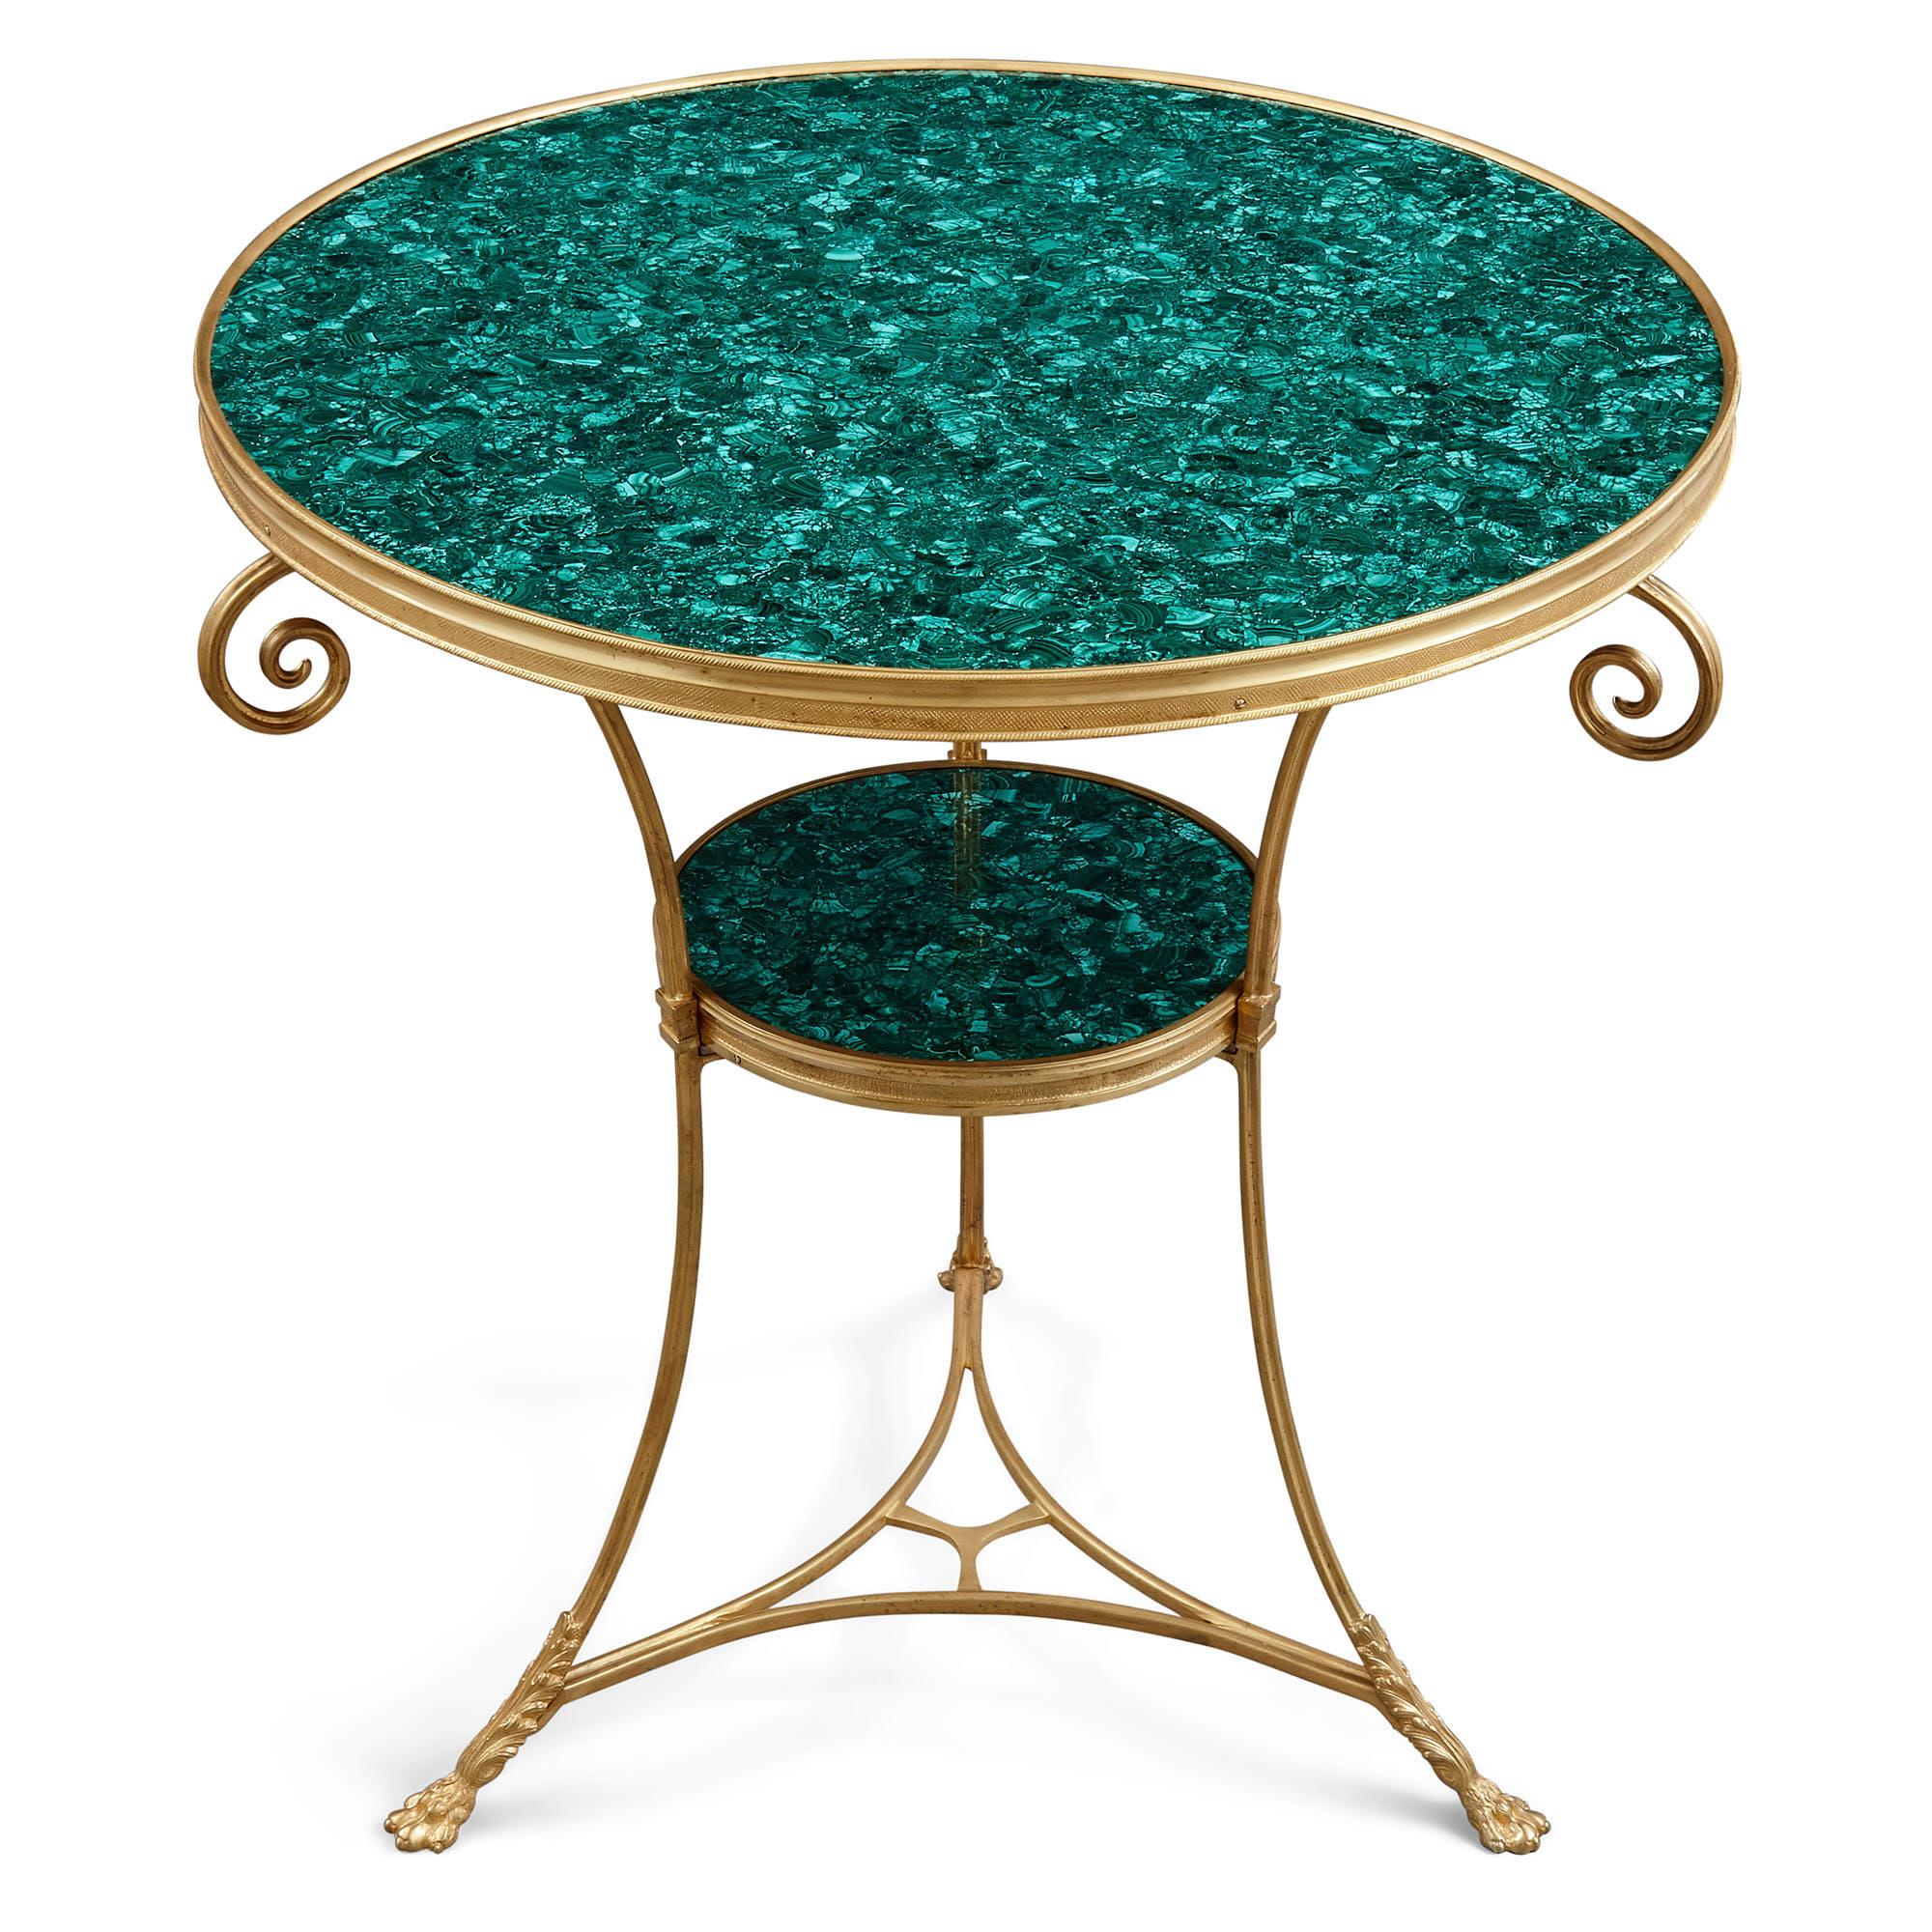 Two French malachite and gilt bronze circular side tables 
French, c. 1900 
Height 69cm, diameter 62cm 

These elegant circular side tables (French: ‘guéridons’) were crafted in France in the early 20th Century, c.1900. Owing to their refined